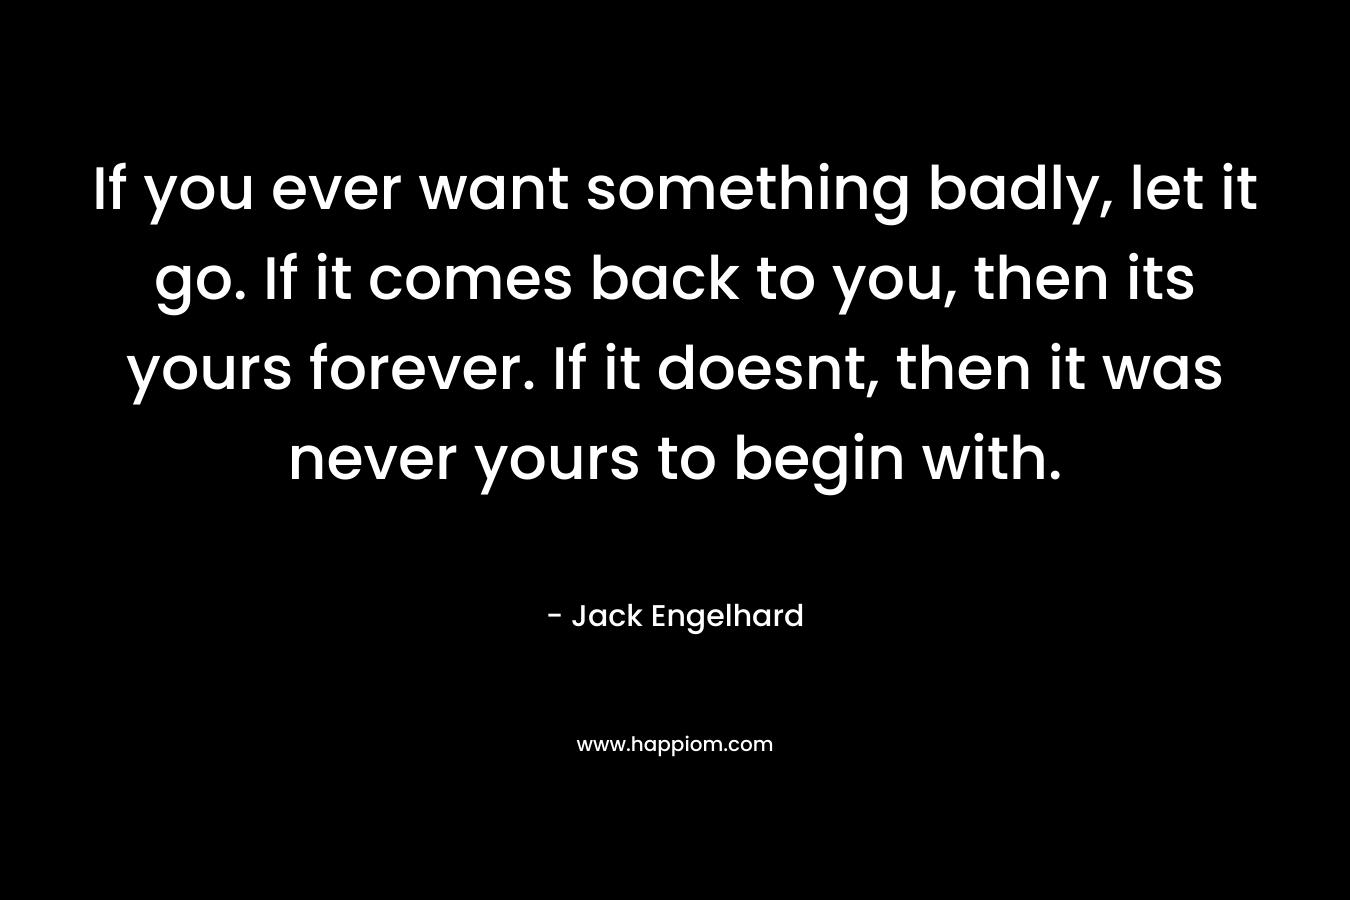 If you ever want something badly, let it go. If it comes back to you, then its yours forever. If it doesnt, then it was never yours to begin with.